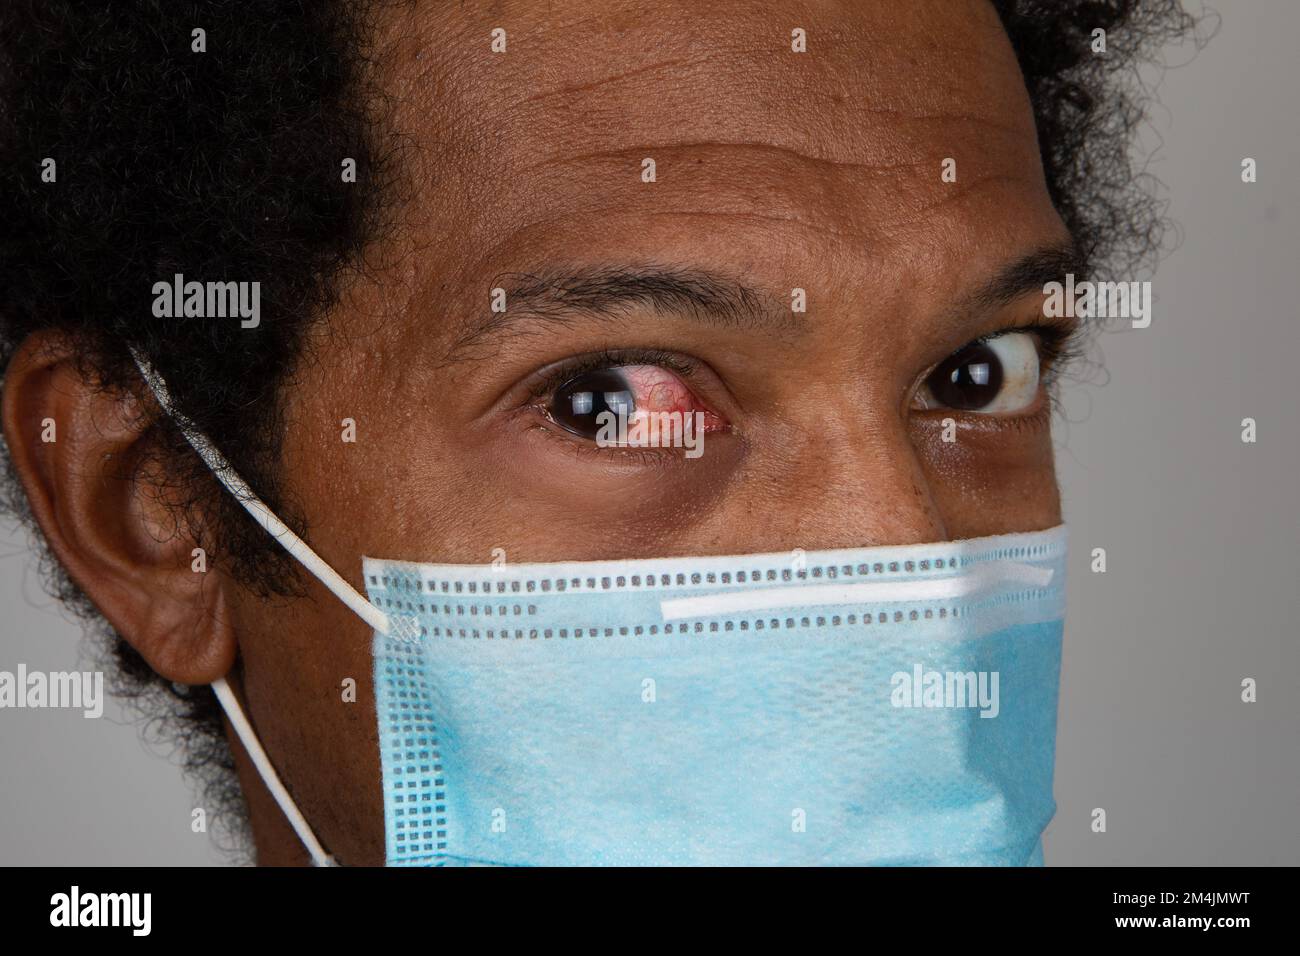 Portrait of African man showing a red eye, concept of one of the symptoms of covid 19 Stock Photo